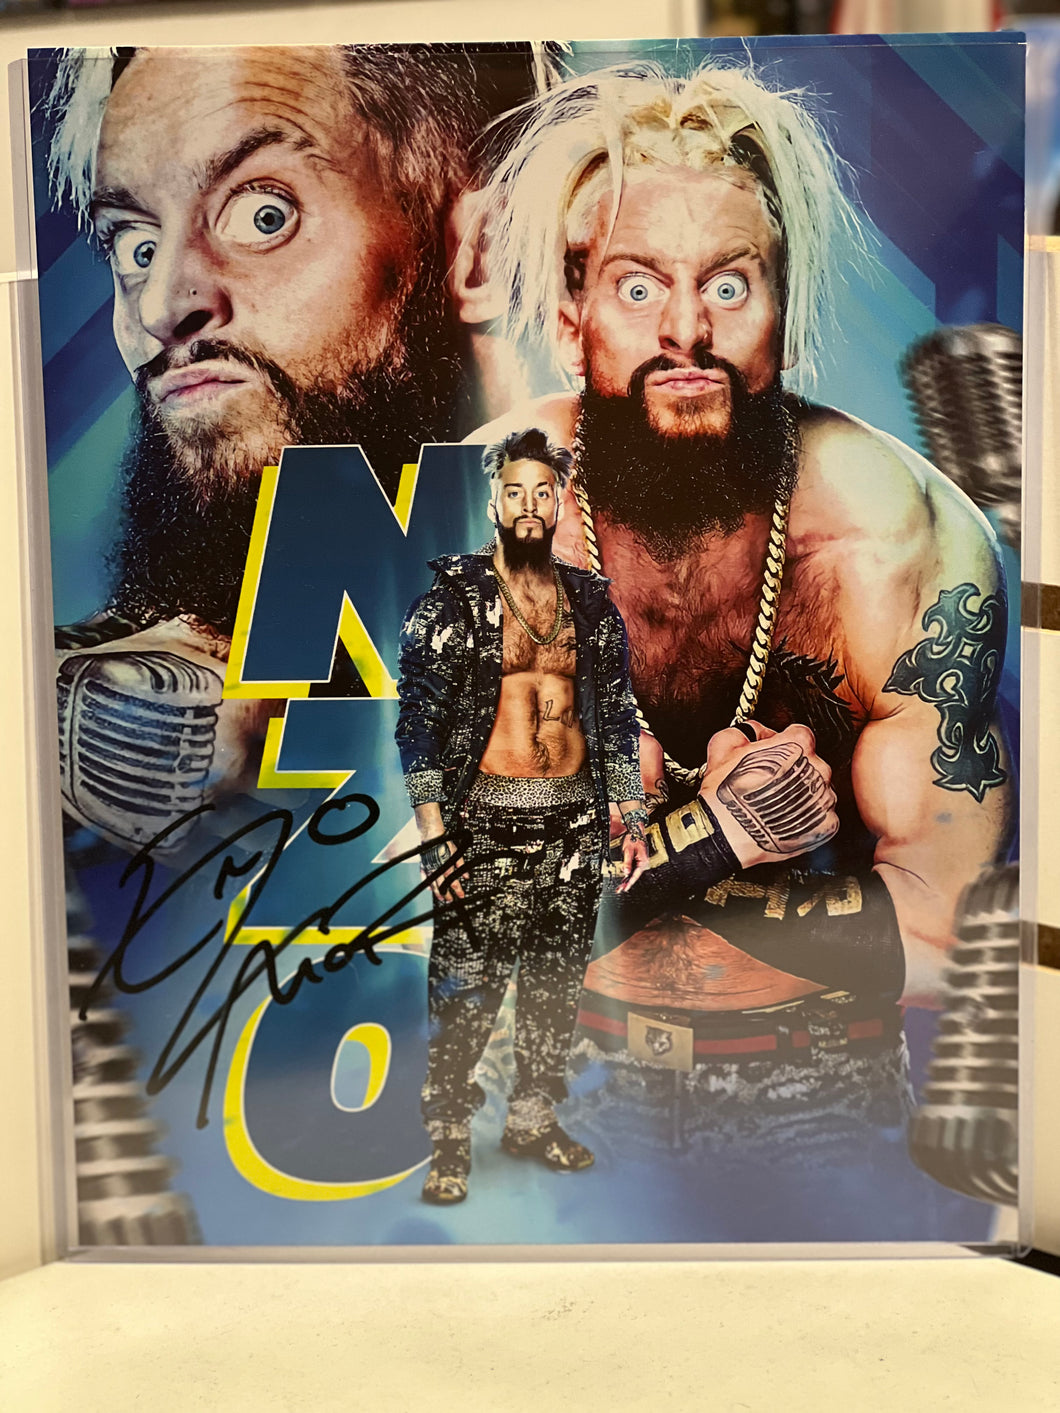 Enzo Amore Autographed 8x10 w/ Toploader